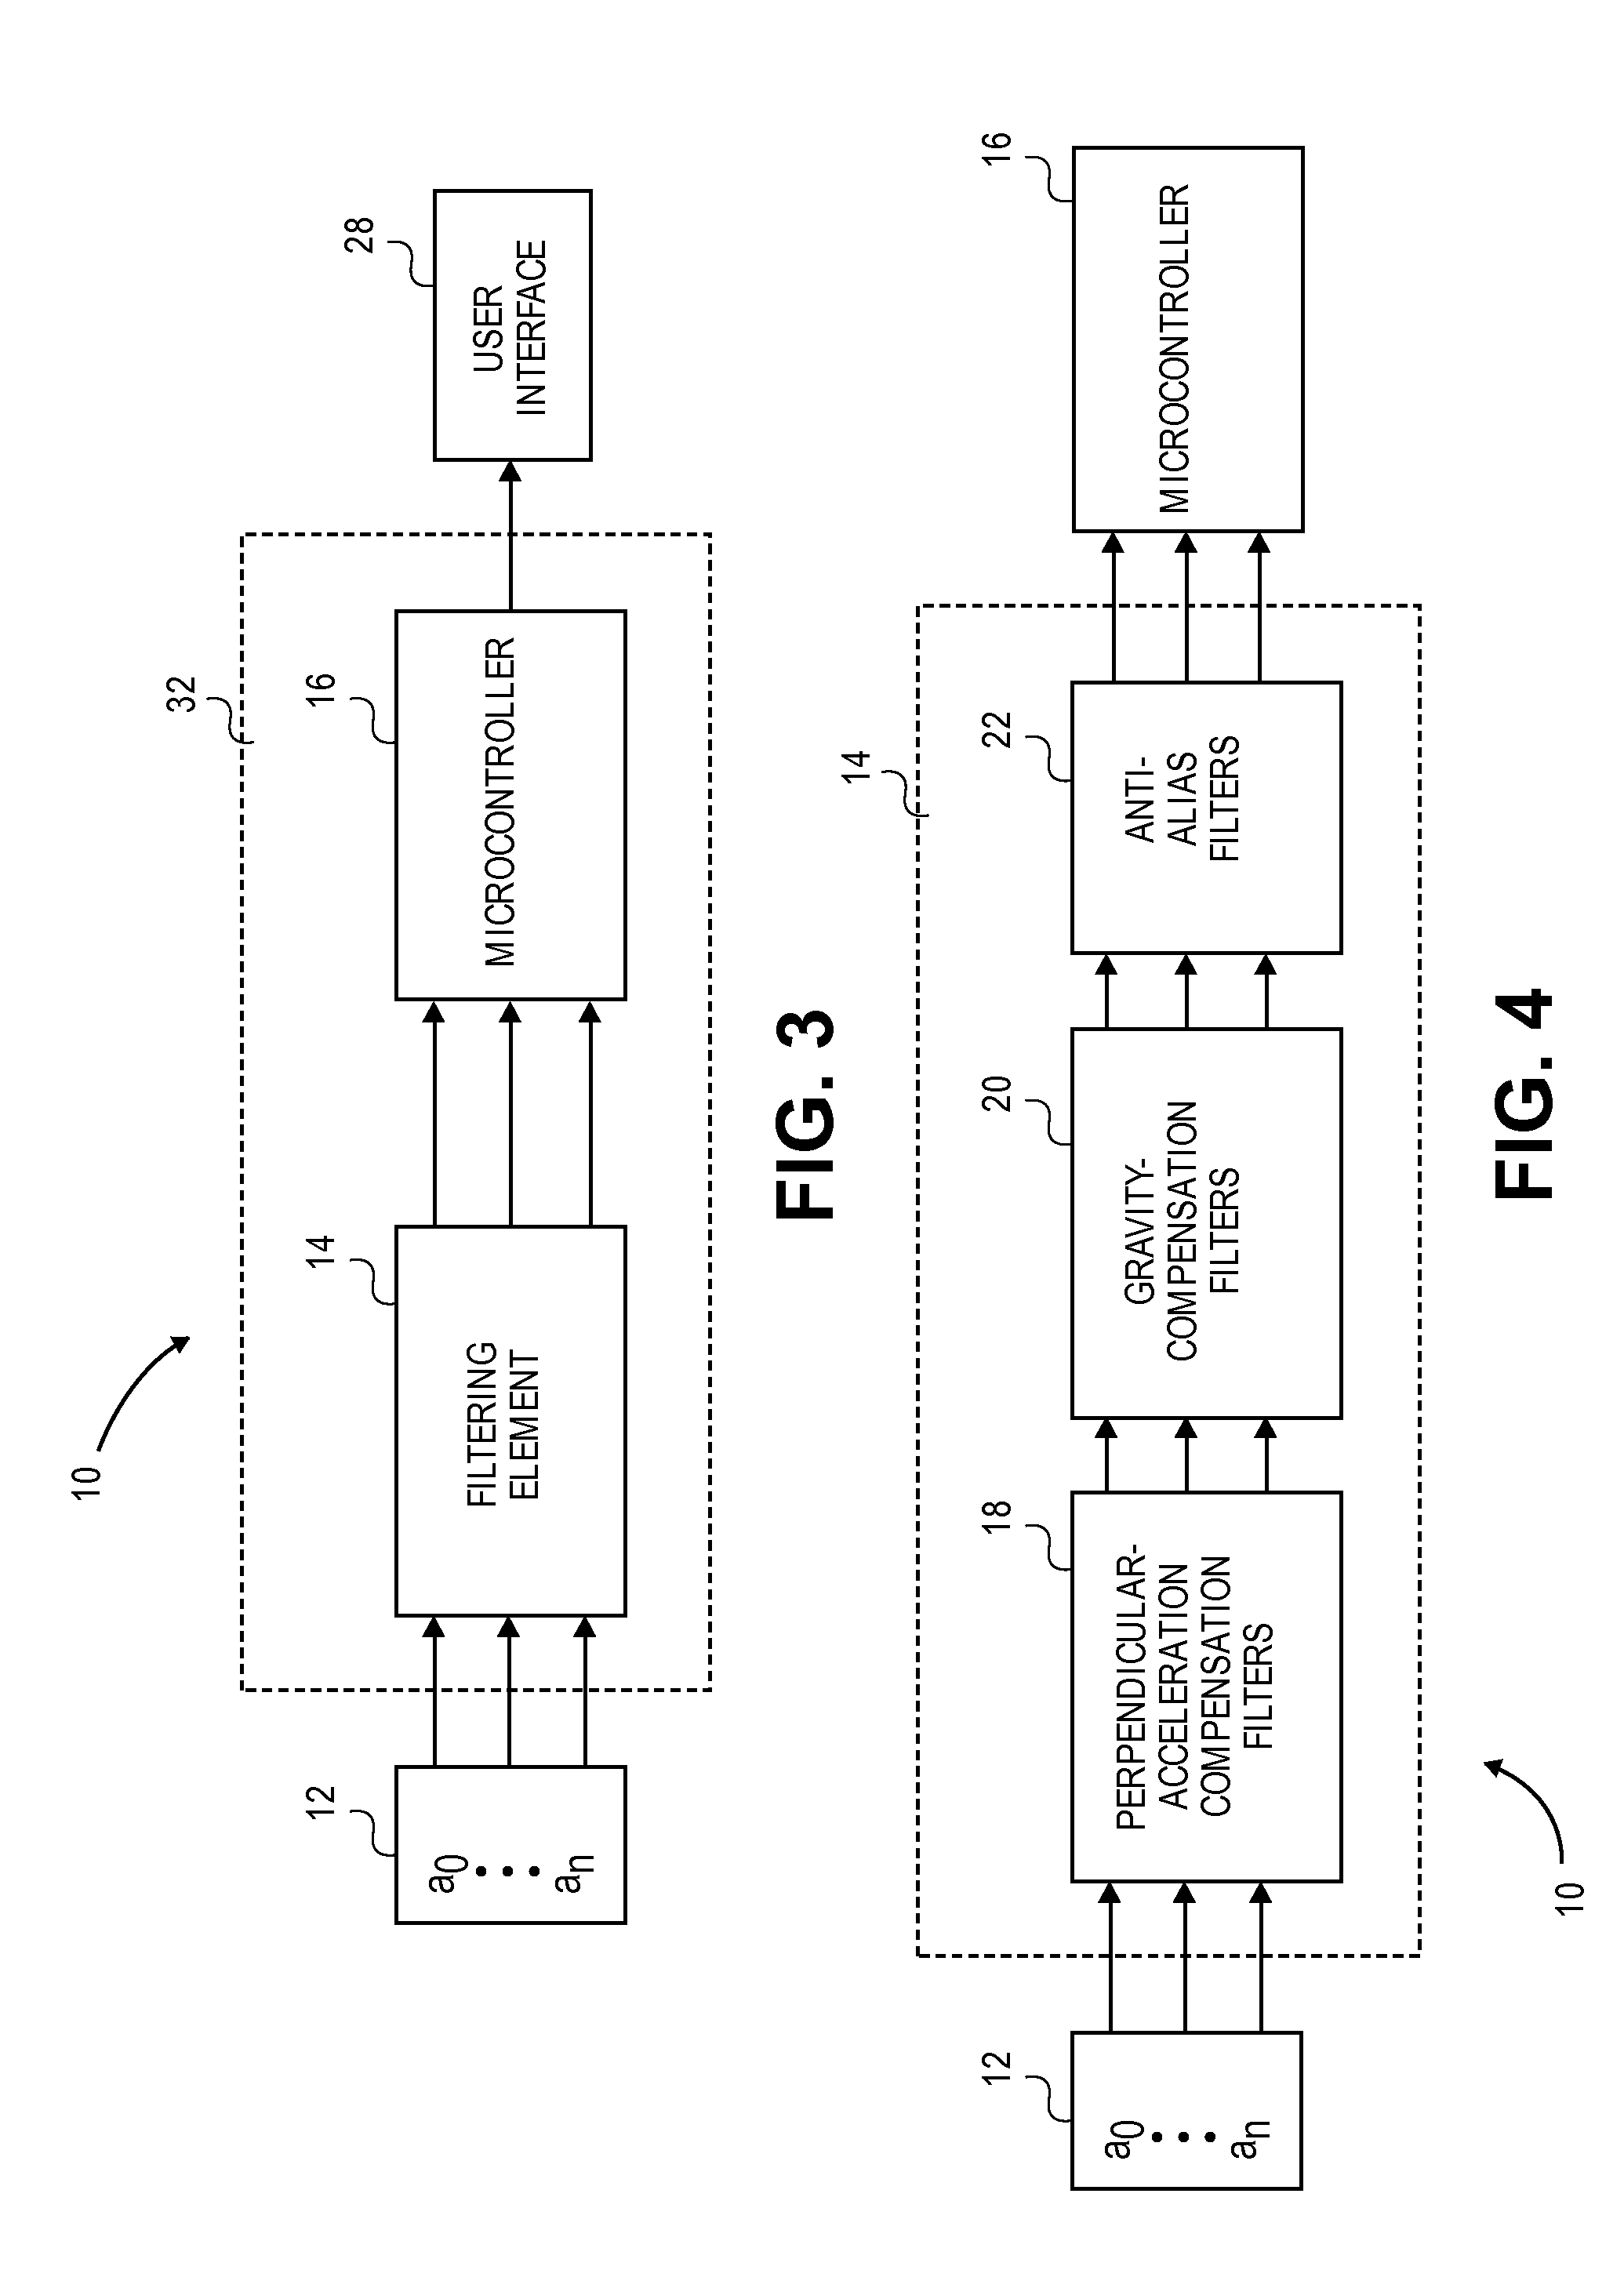 Method and apparatus for determining the attachment position of a motion sensing apparatus